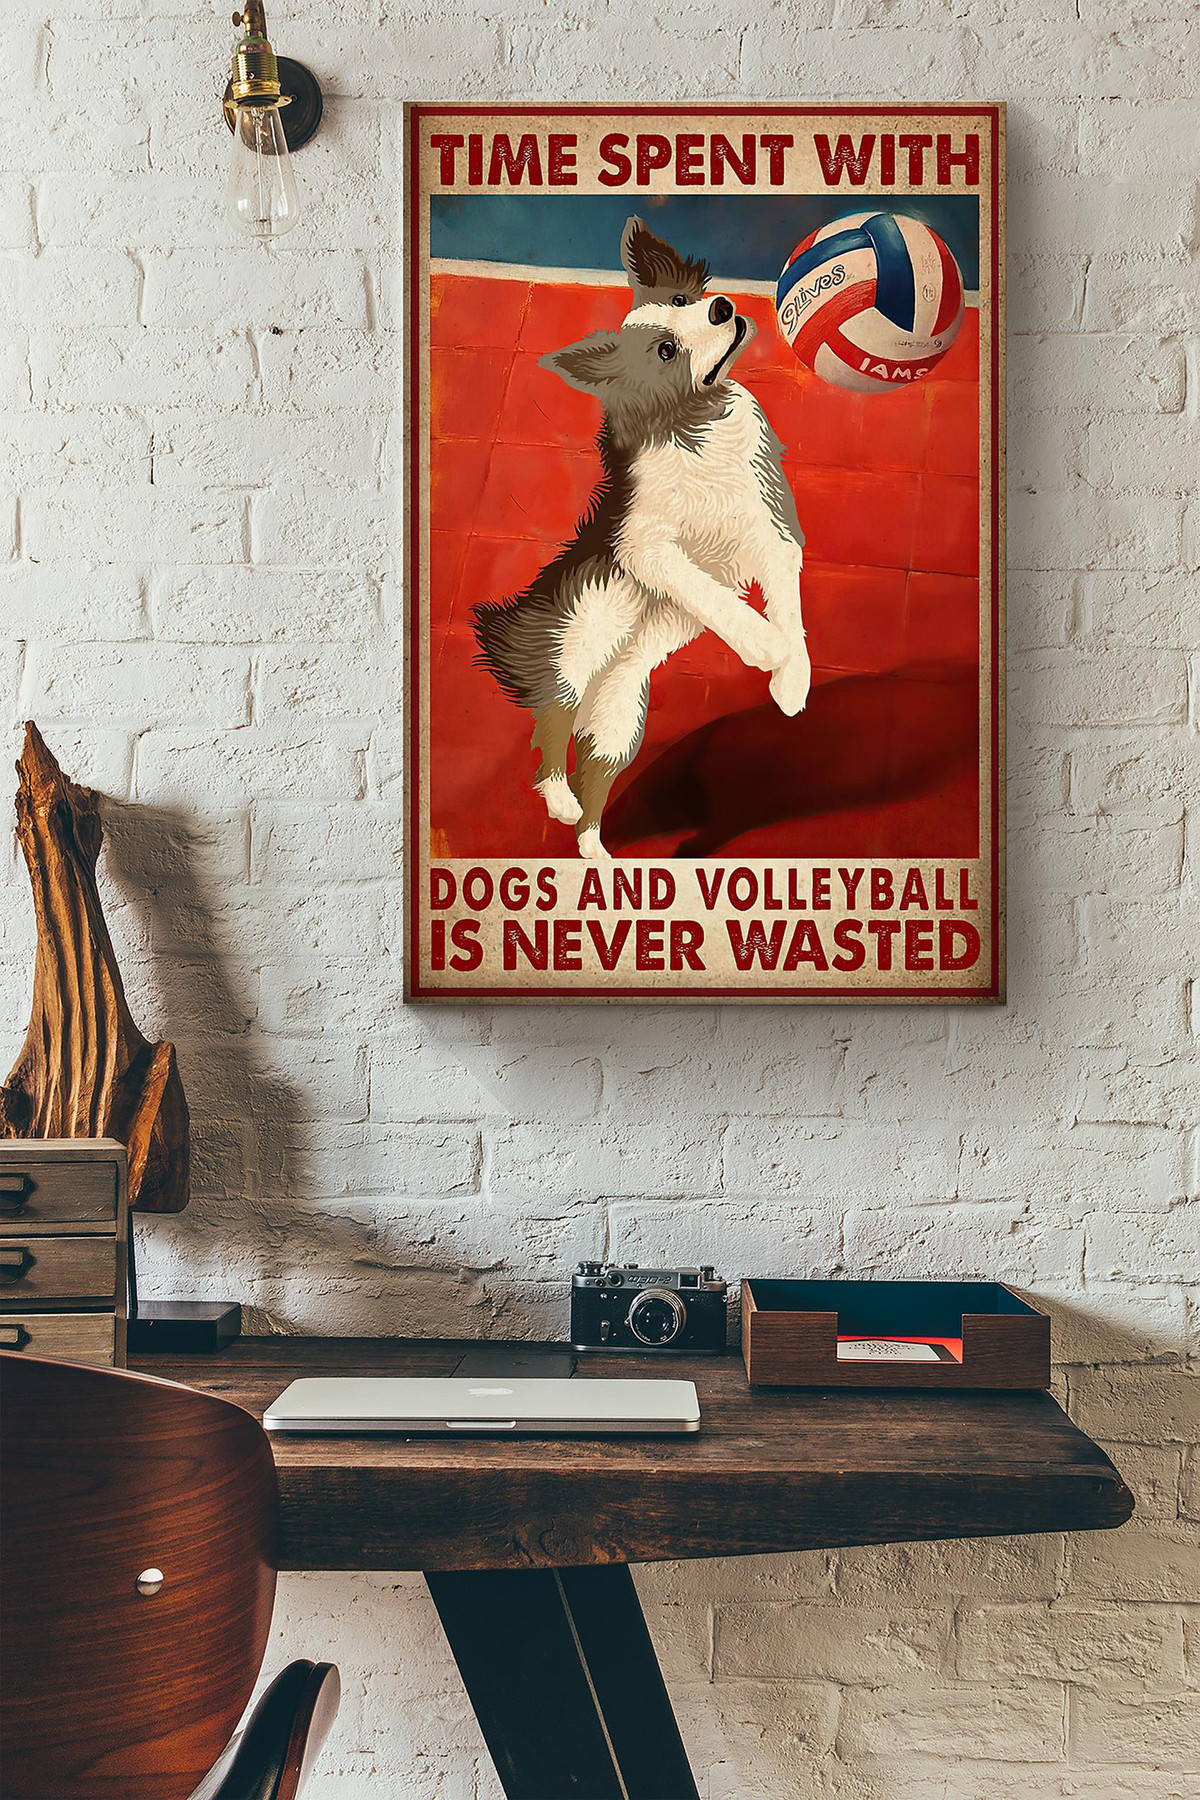 Time Spent With Dogs And Volleyball Is Never Wasted Canvas Painting Ideas, Canvas Hanging Prints, Gift Idea Framed Prints, Canvas Paintings Wrapped Canvas 8x10